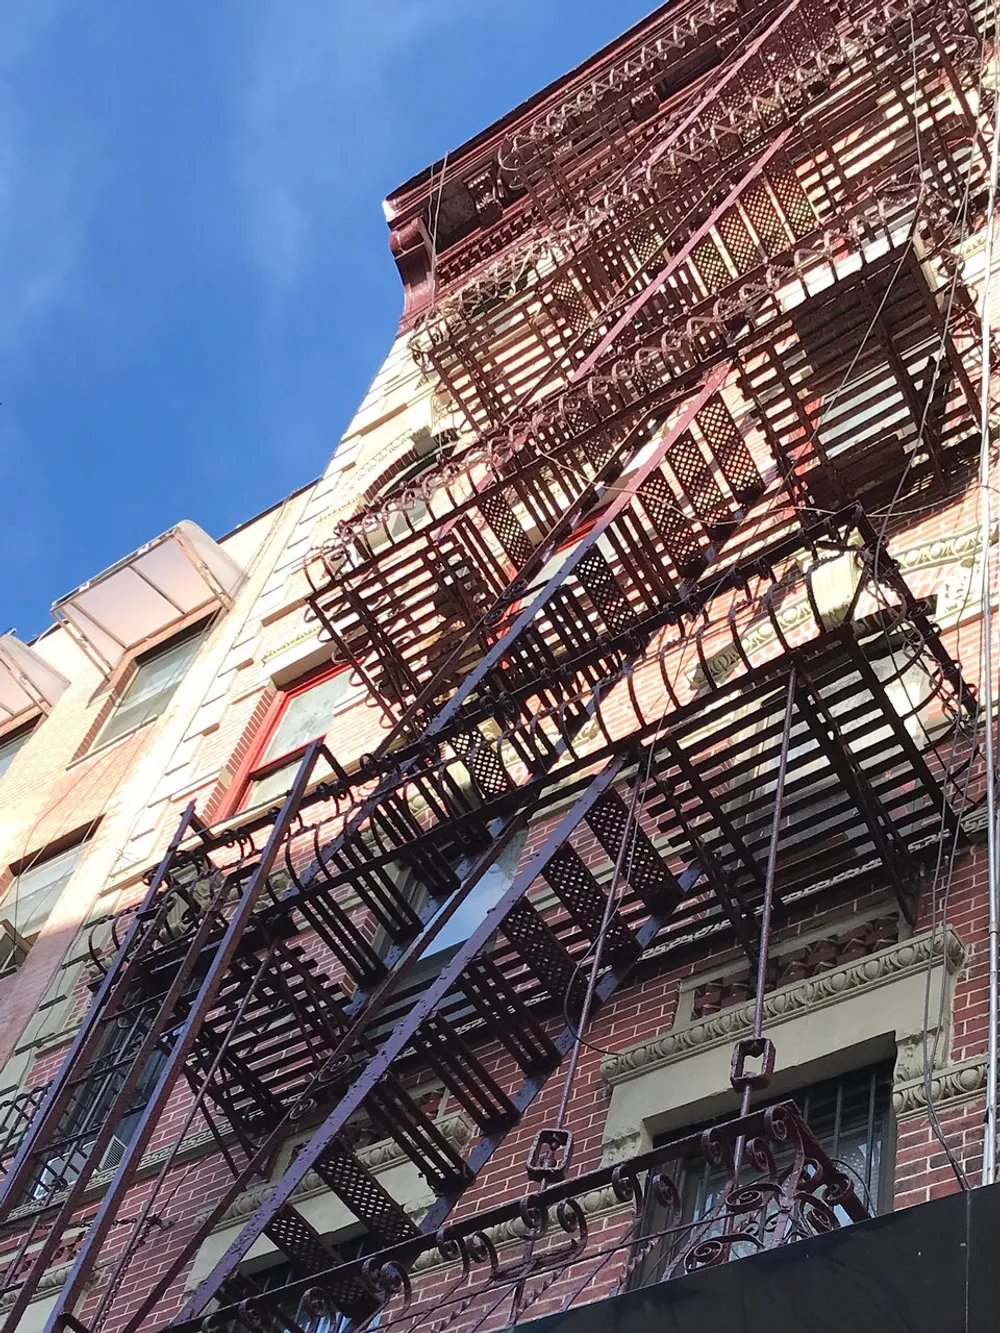 The image shows a multistory building with intricate fire escapes against a blue sky